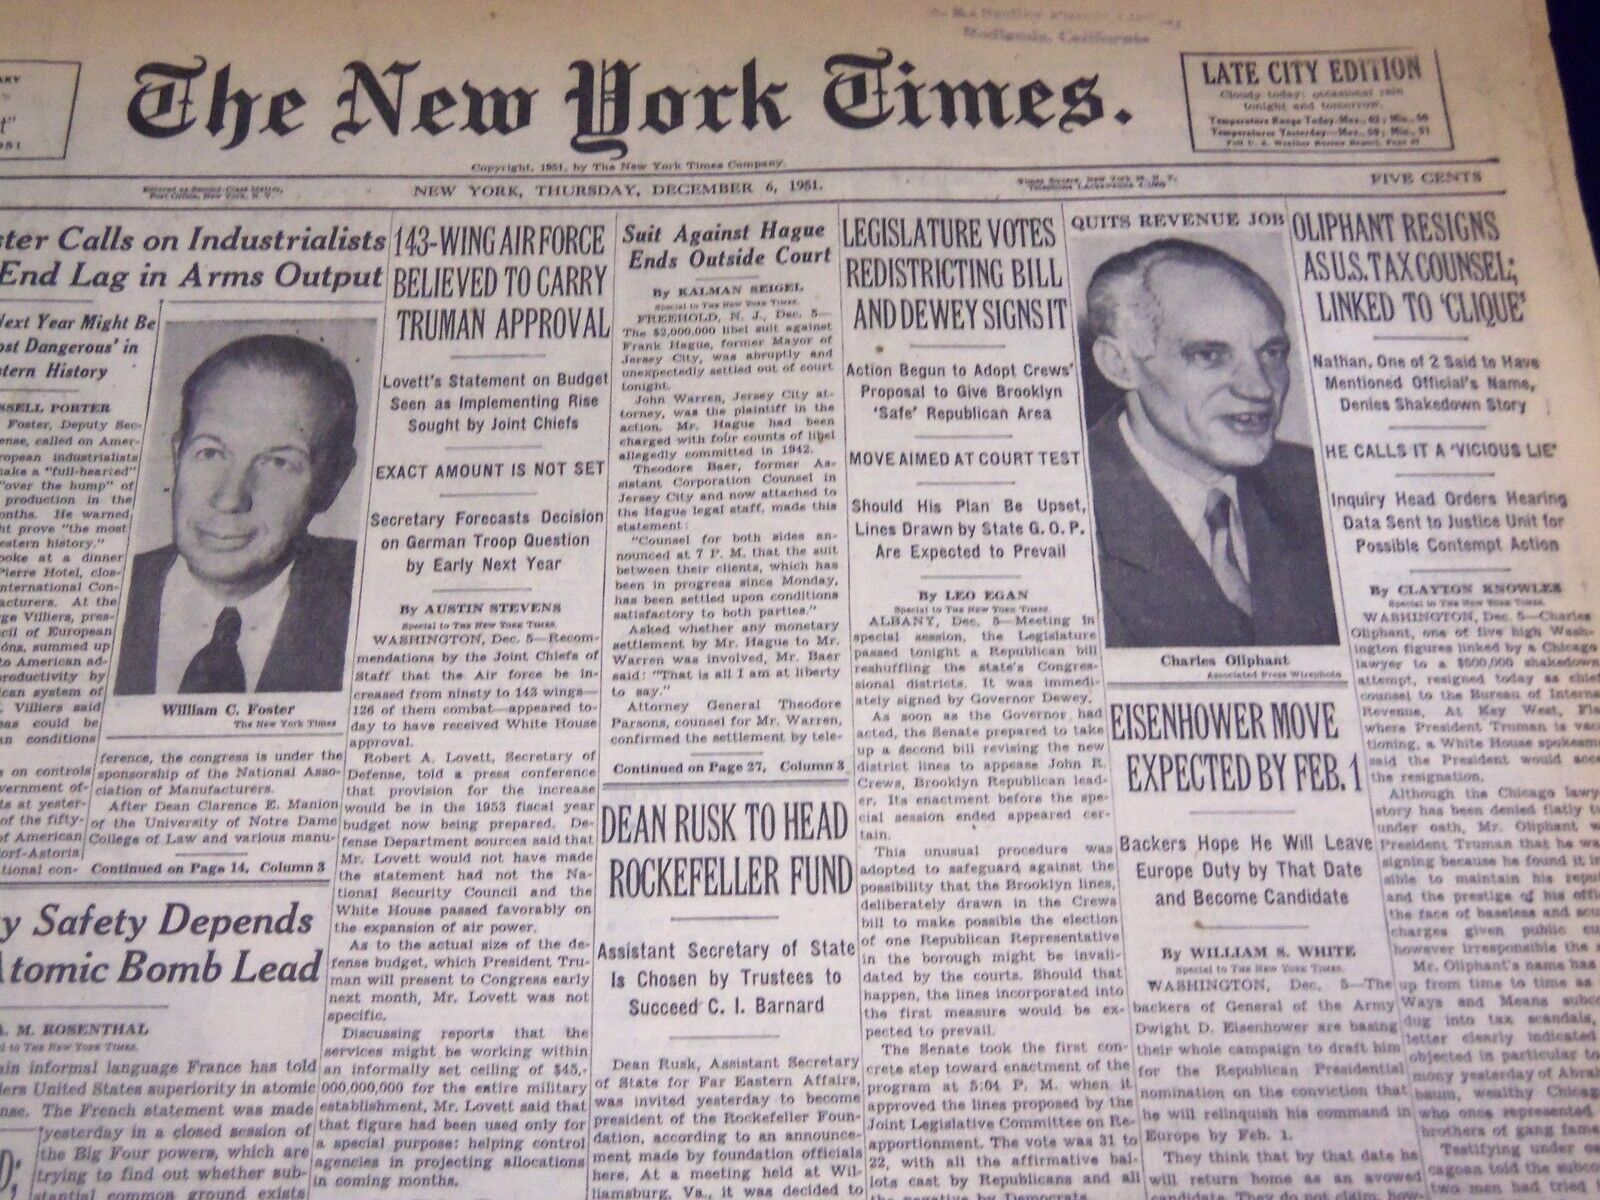 1951 DEC 6 NEW YORK TIMES - EISENHOWER MOVE EXPECTED BY FEB. 1 - NT 2270